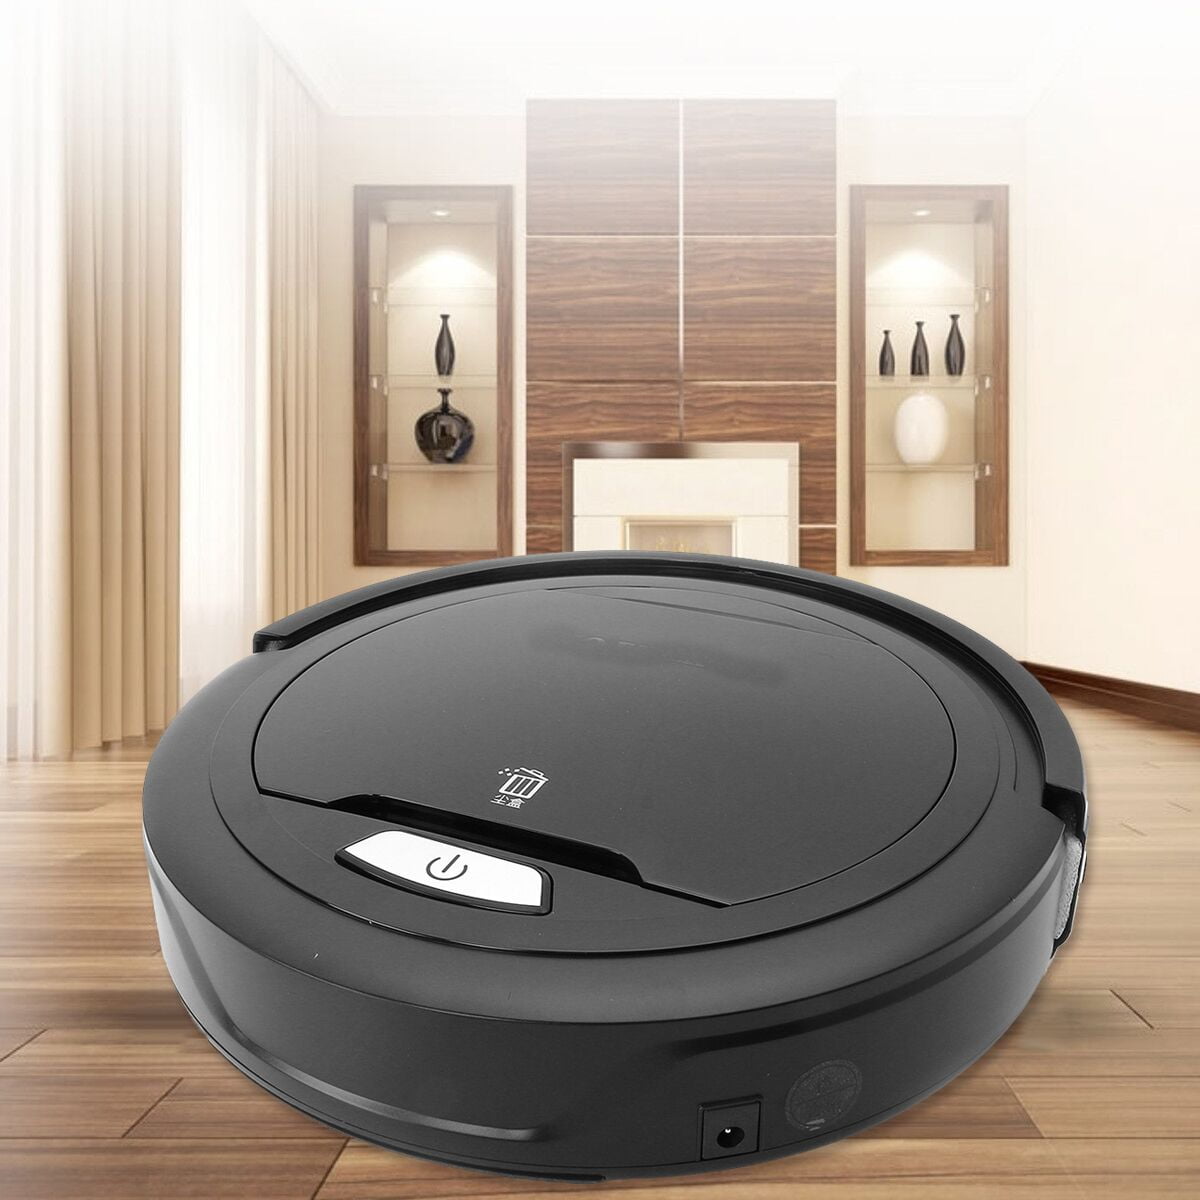 Automatic Robot Vacuum Cleaner Robotic Auto Home Cleaning For